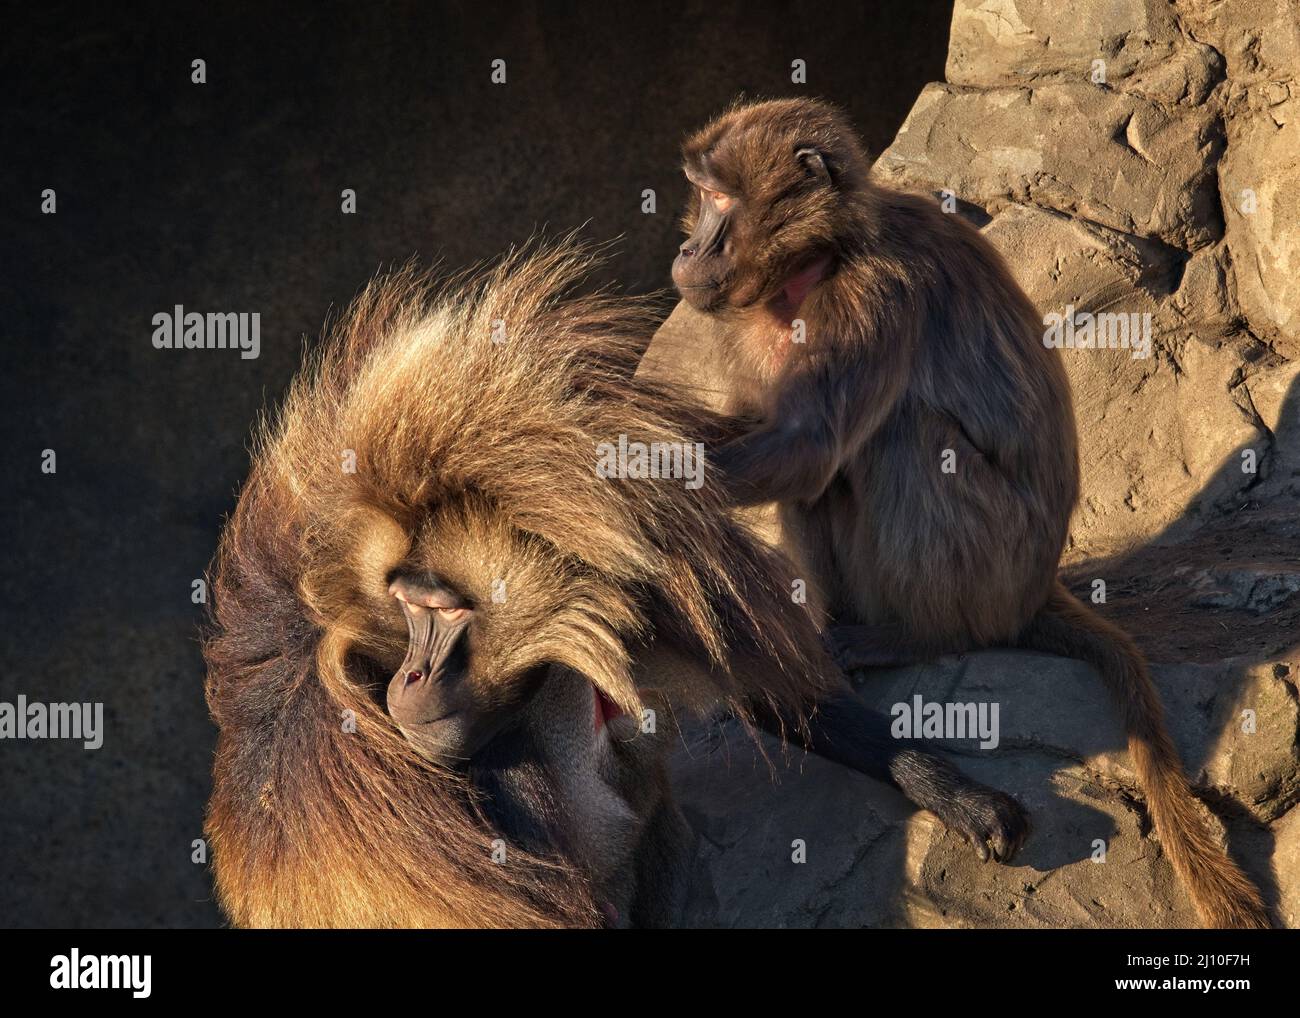 Alpha male Gelada monkey (Theropithecus gelada) reacts to a disturbance during a grooming session with a subordinate group member - captive animals. Stock Photo